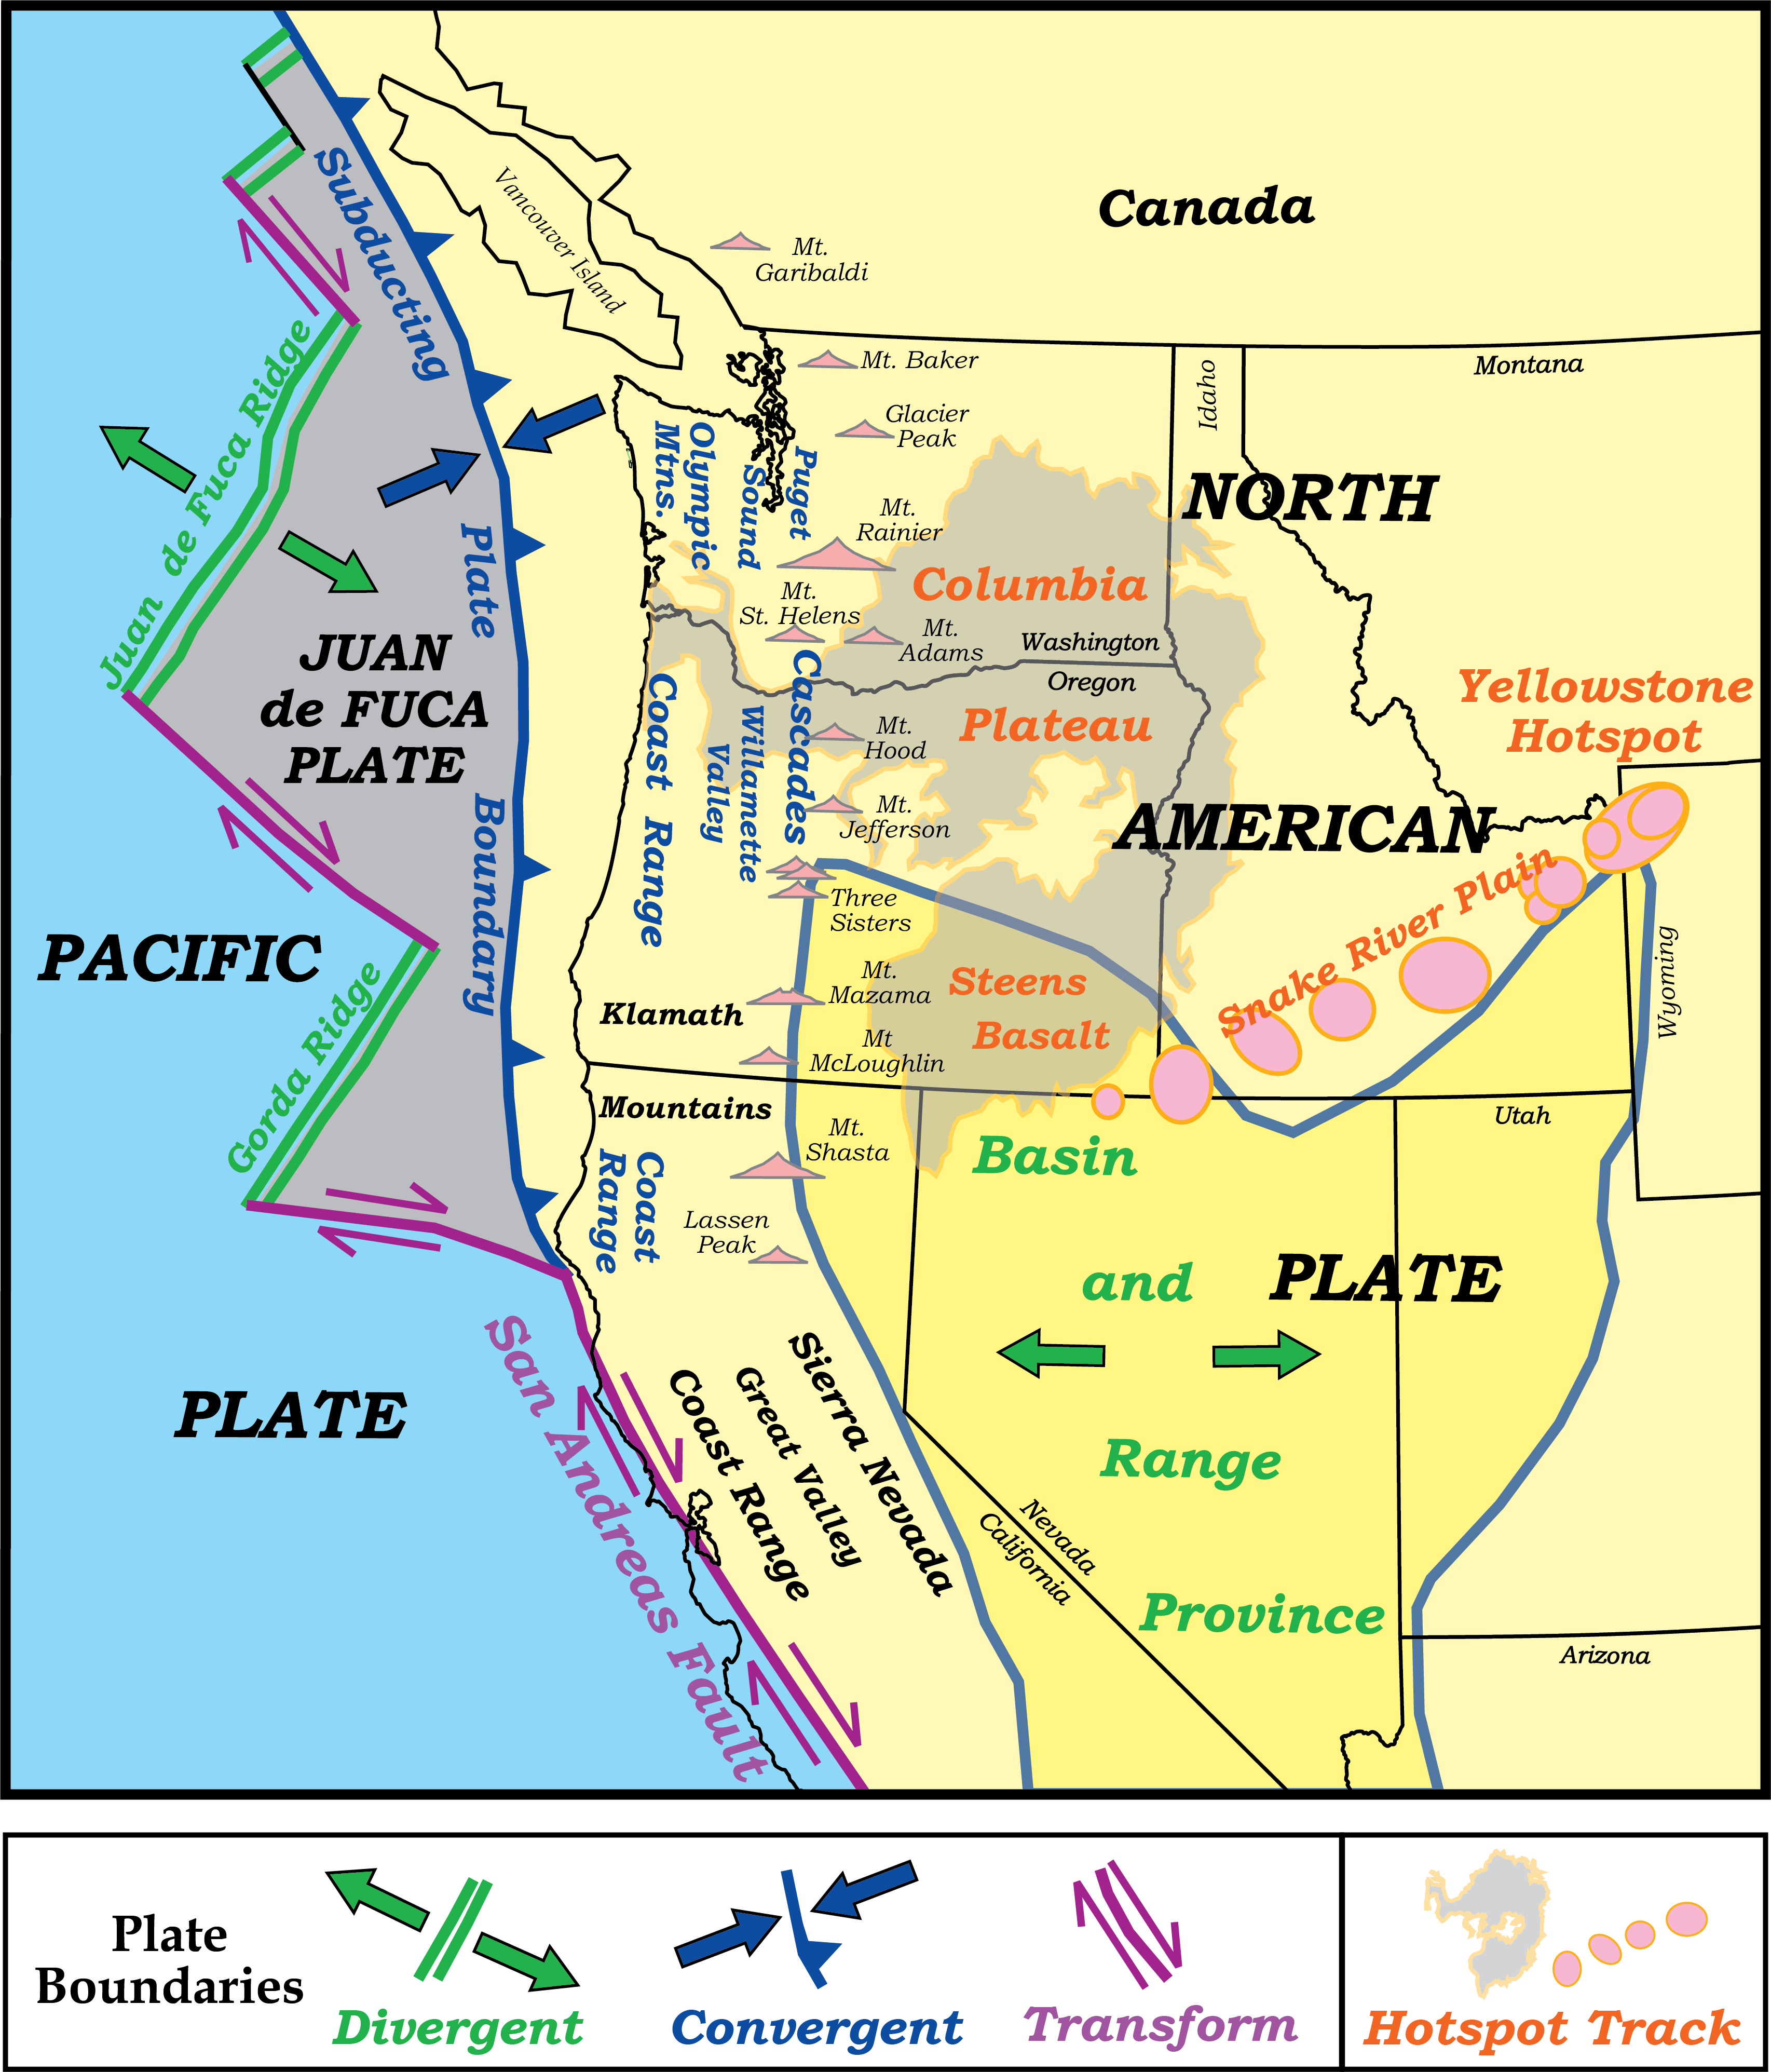 map of northwest us with multiple plates, volcanoes, and physiographic provinces labeled